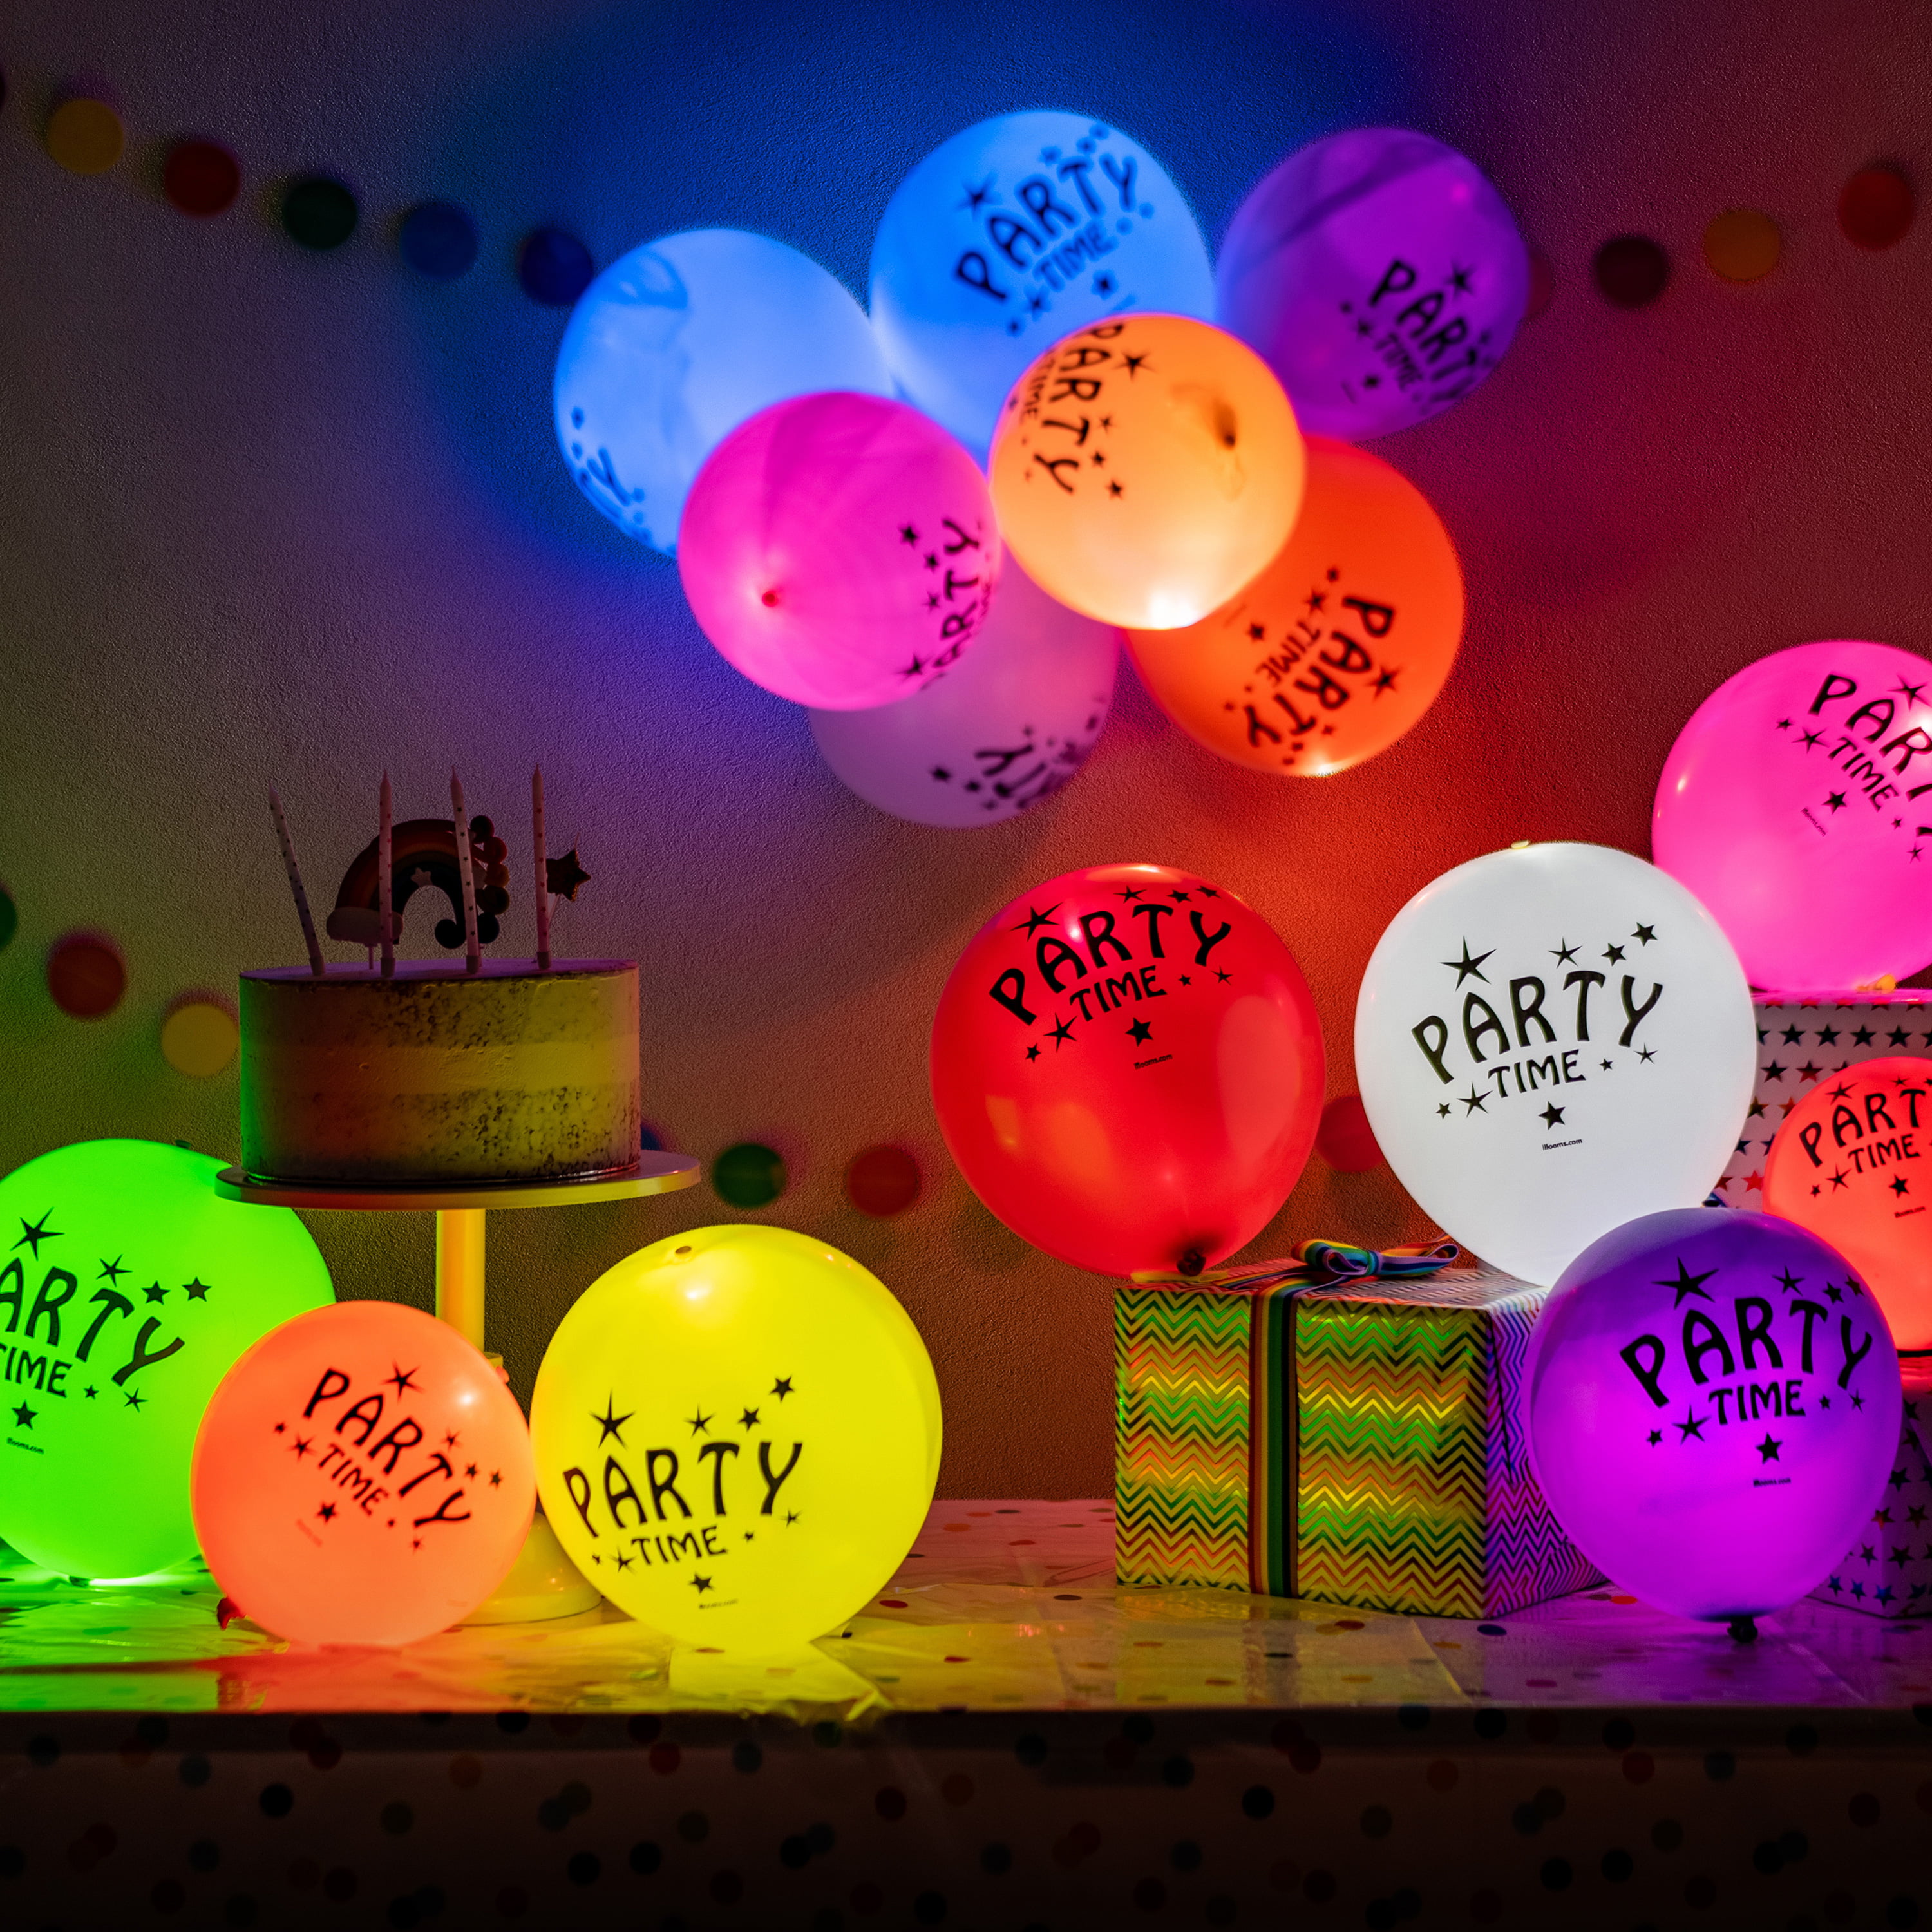 15ct Illooms Led Light Up Mixed Solid Balloon : Target